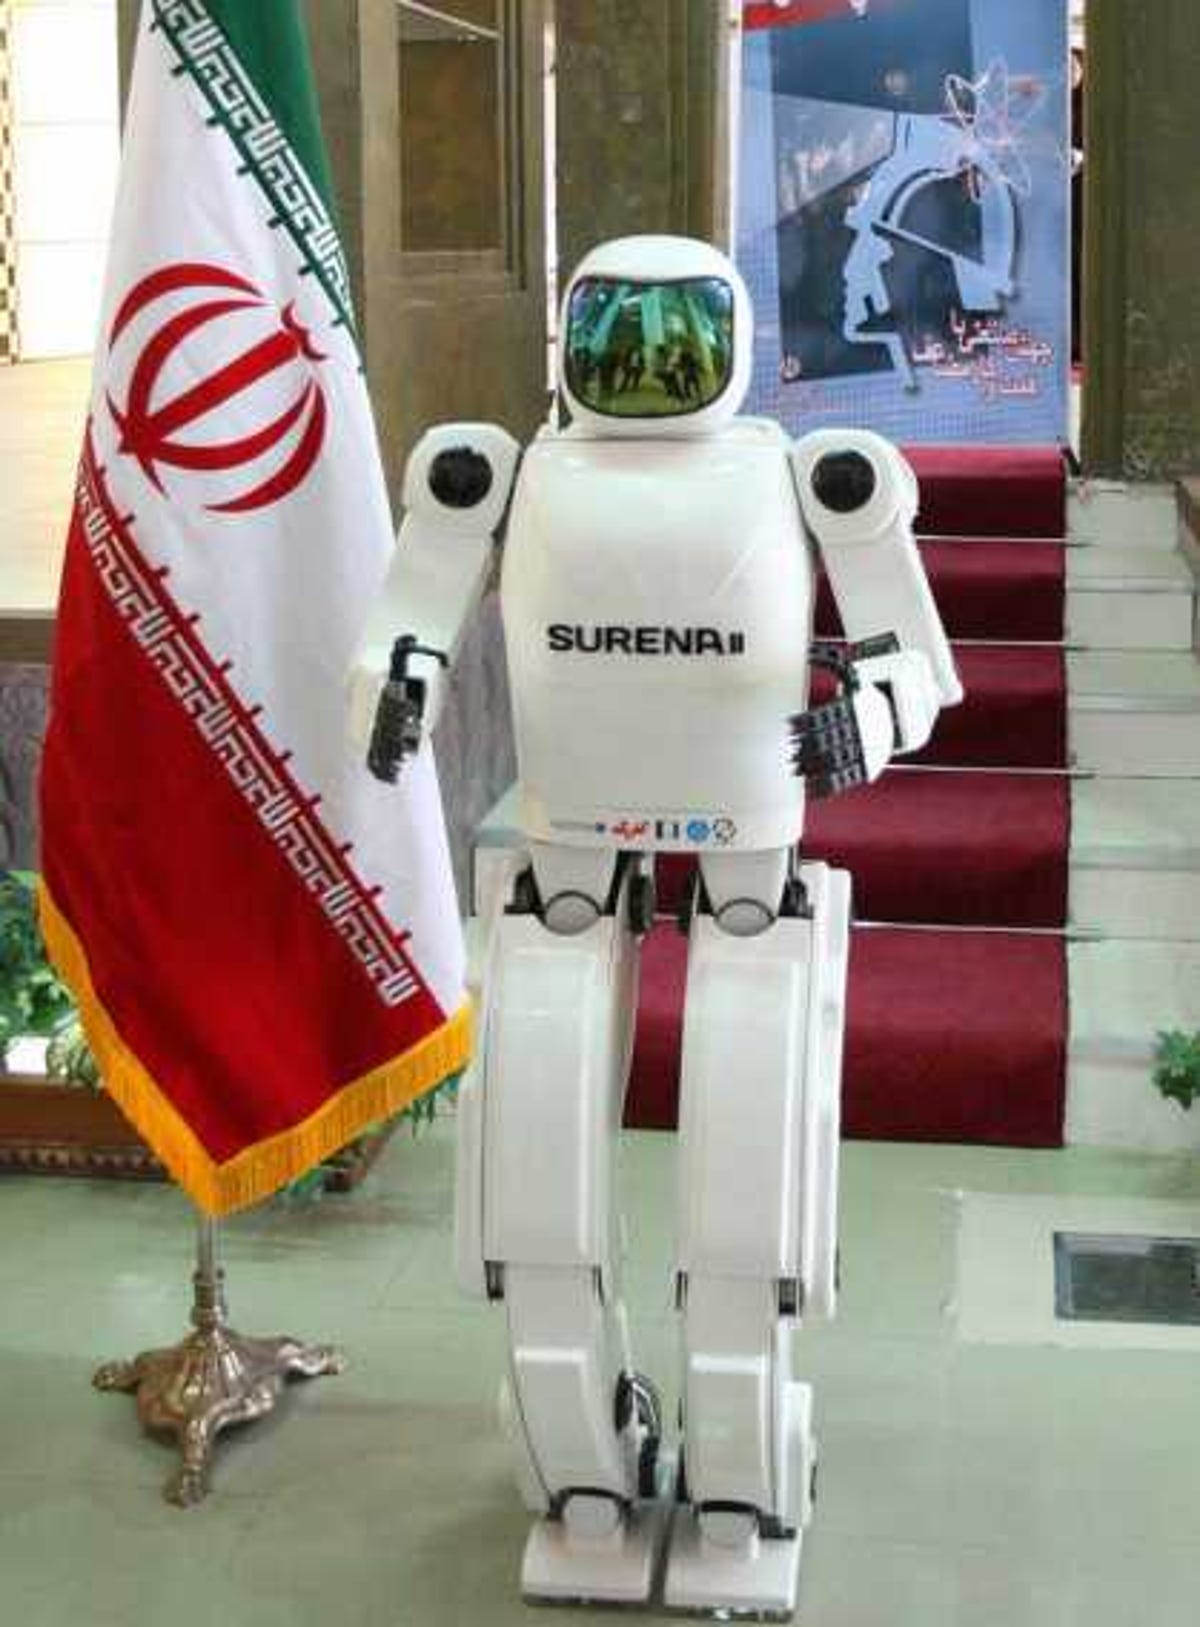 Iranian humanoid robot Surena II is seen in Tehran at a ceremony marking the national day of industry.